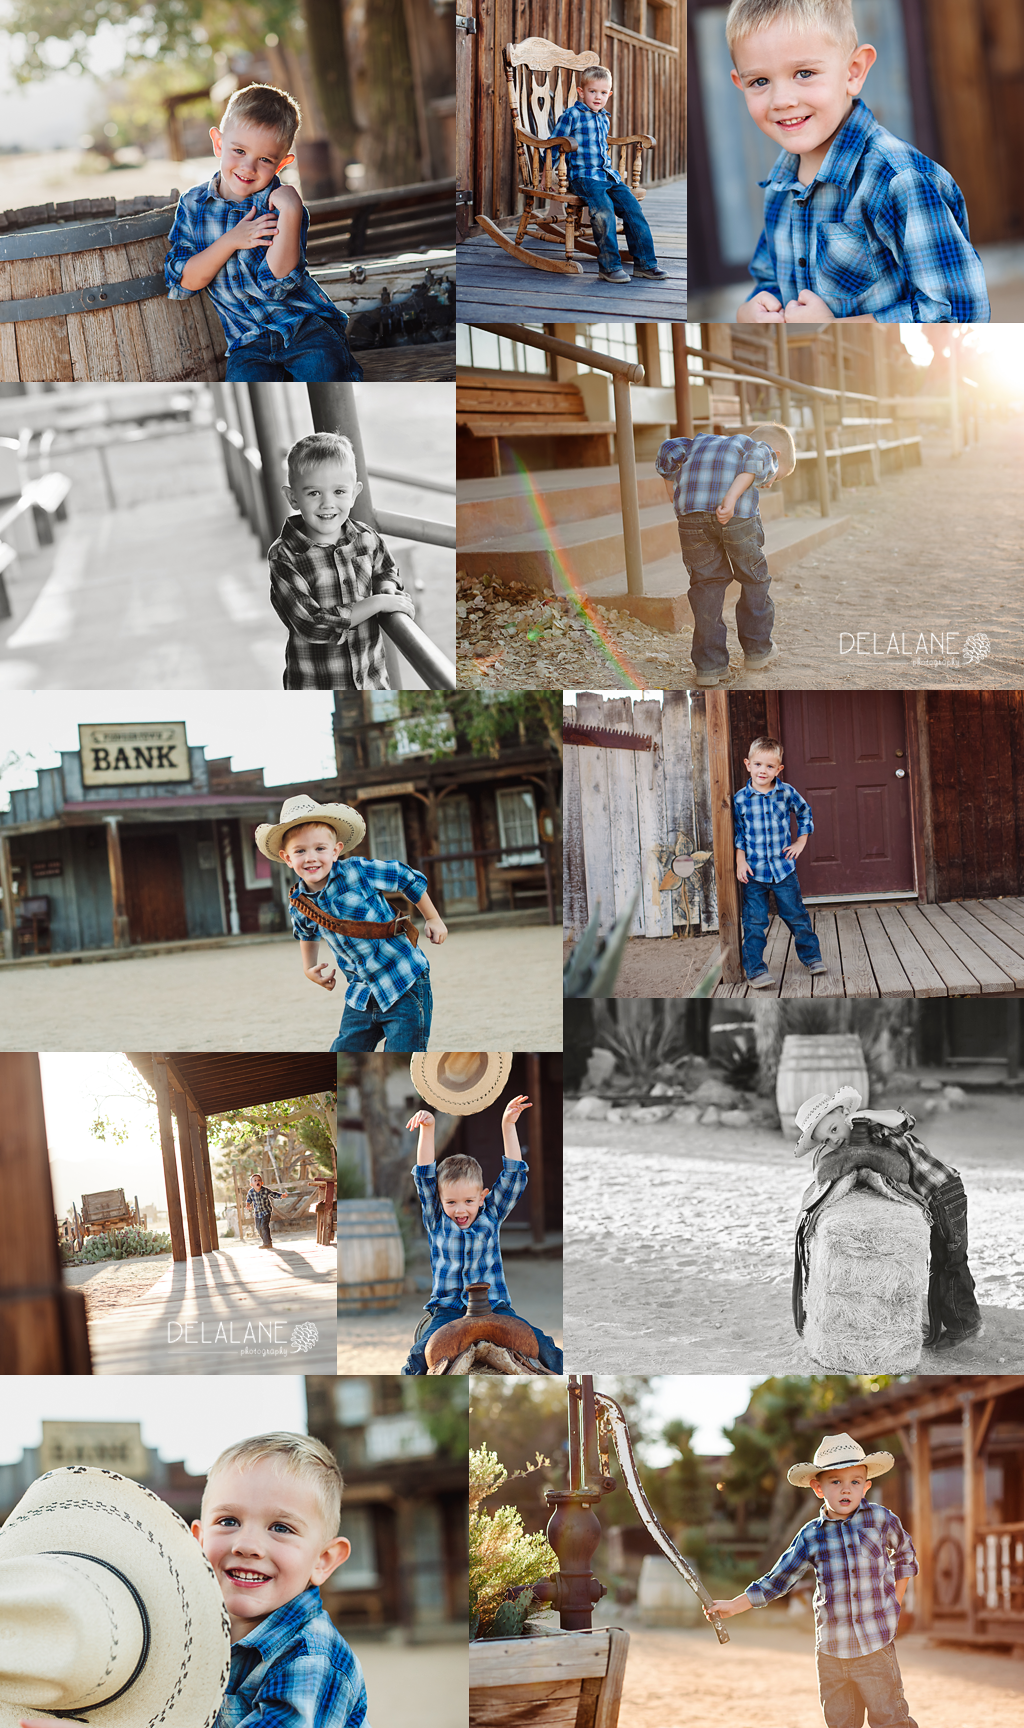 Christian Four Years | DelaLane Photography | 29 Palms Photographer